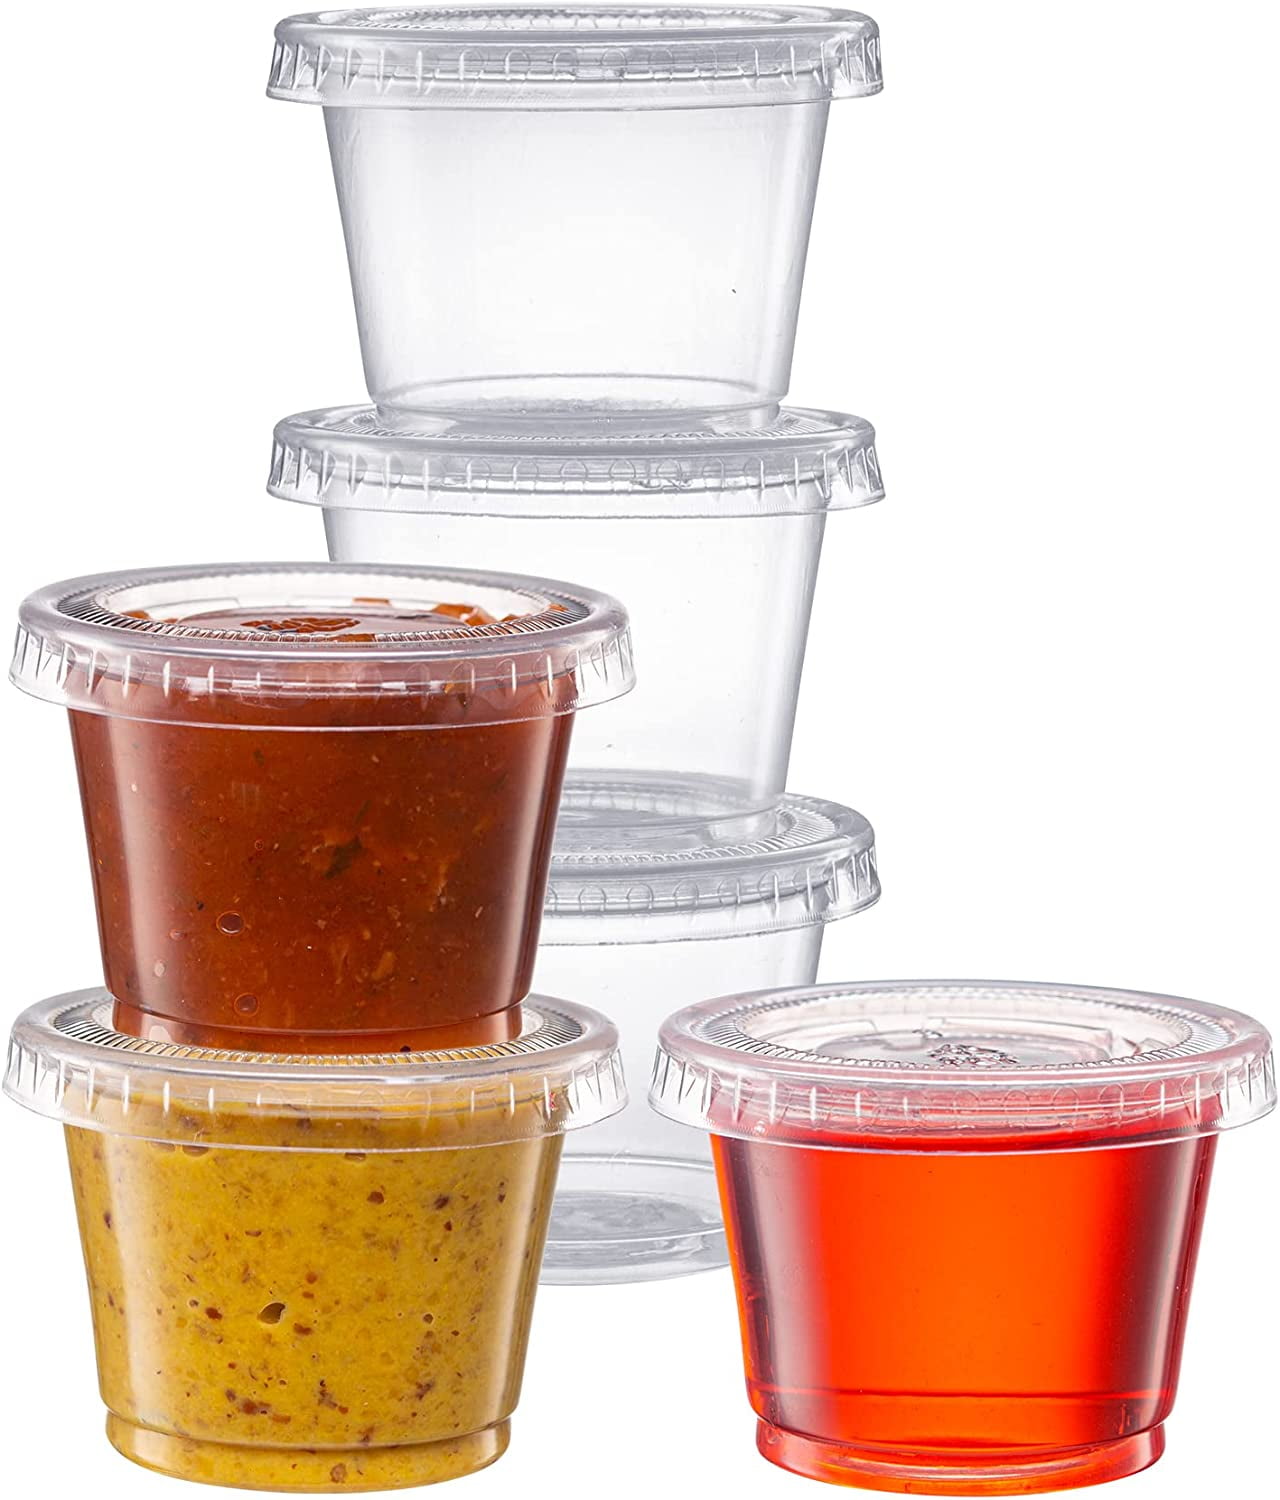 Comfy Package 1 Oz Condiment Containers Small Plastic Containers